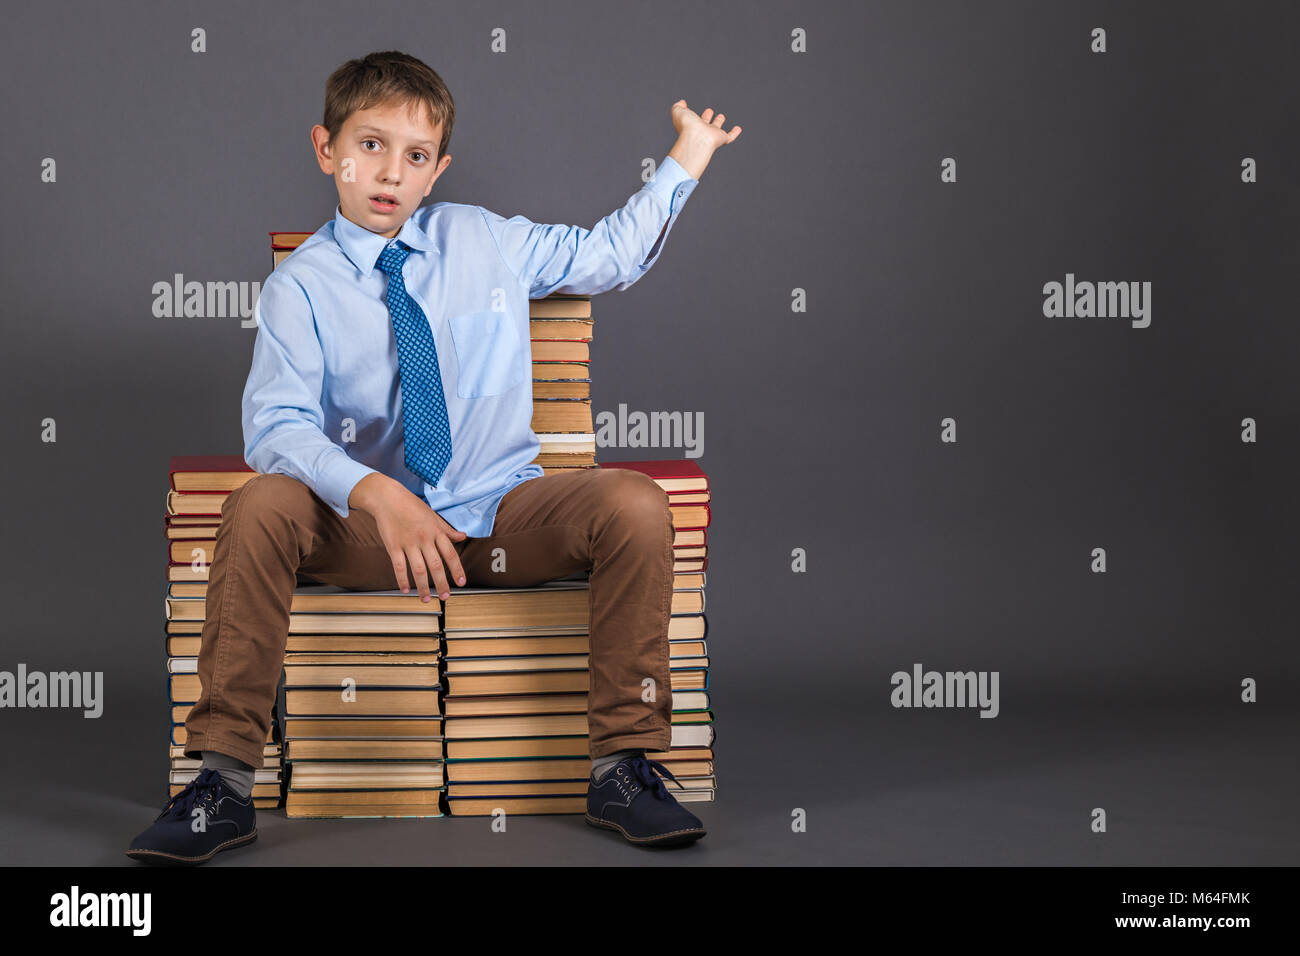 Education сoncept. Boy sitting on a throne from books, demonstrates something behind himself. Copy space for the demonstration object Stock Photo